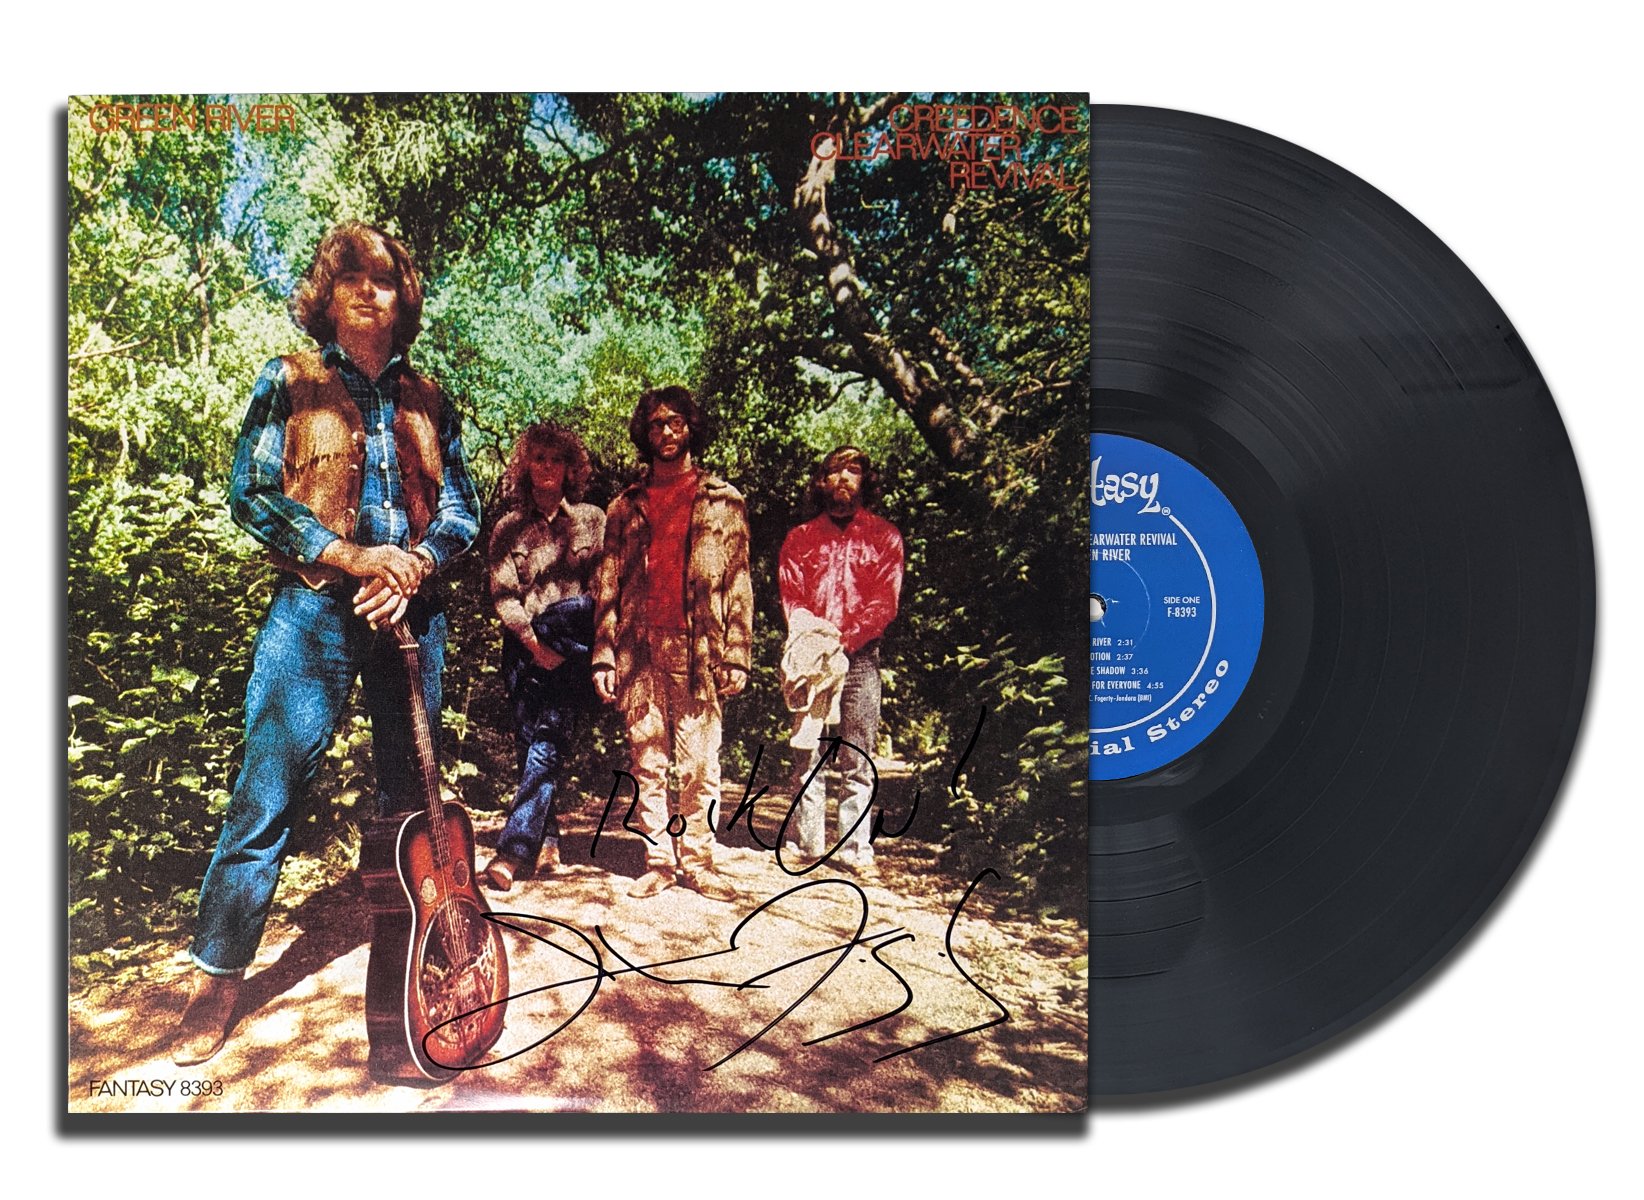 John Fogerty Creedence Clearwater Revival CCR Signed GREEN RIVER Autographed Vinyl Album LP